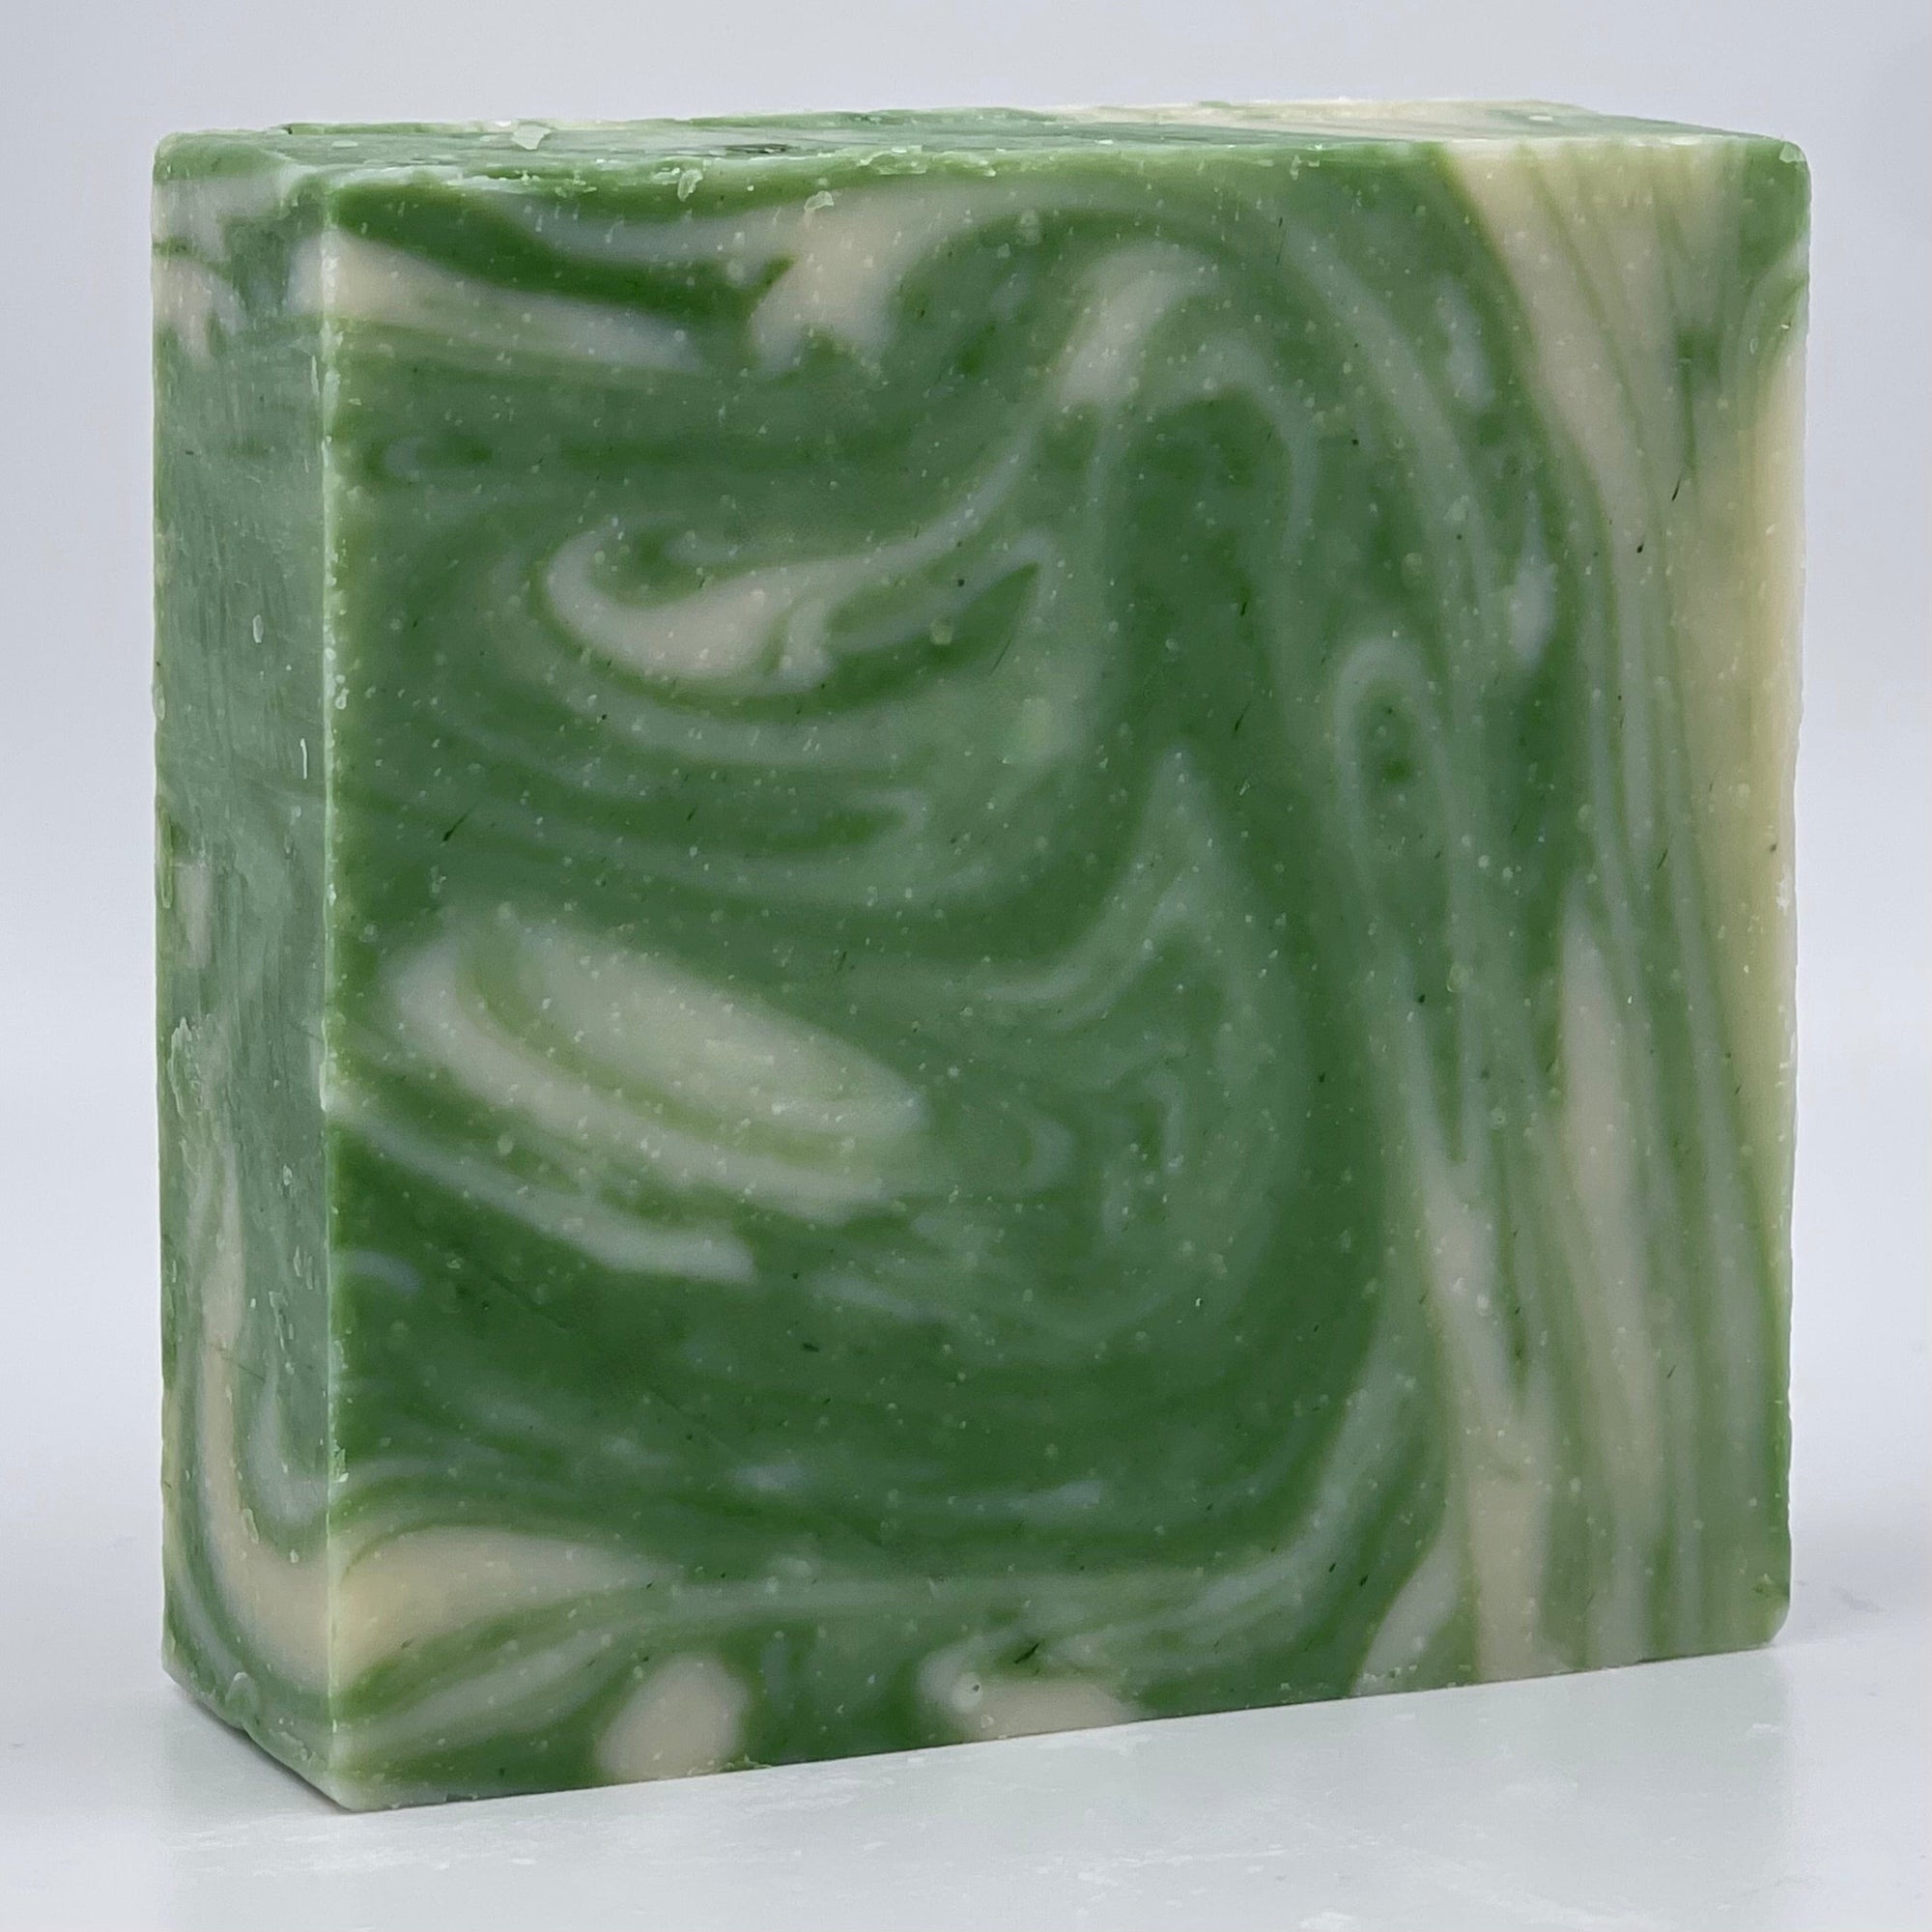 Cucumber Melon – the-filthy-floridian-soap-company